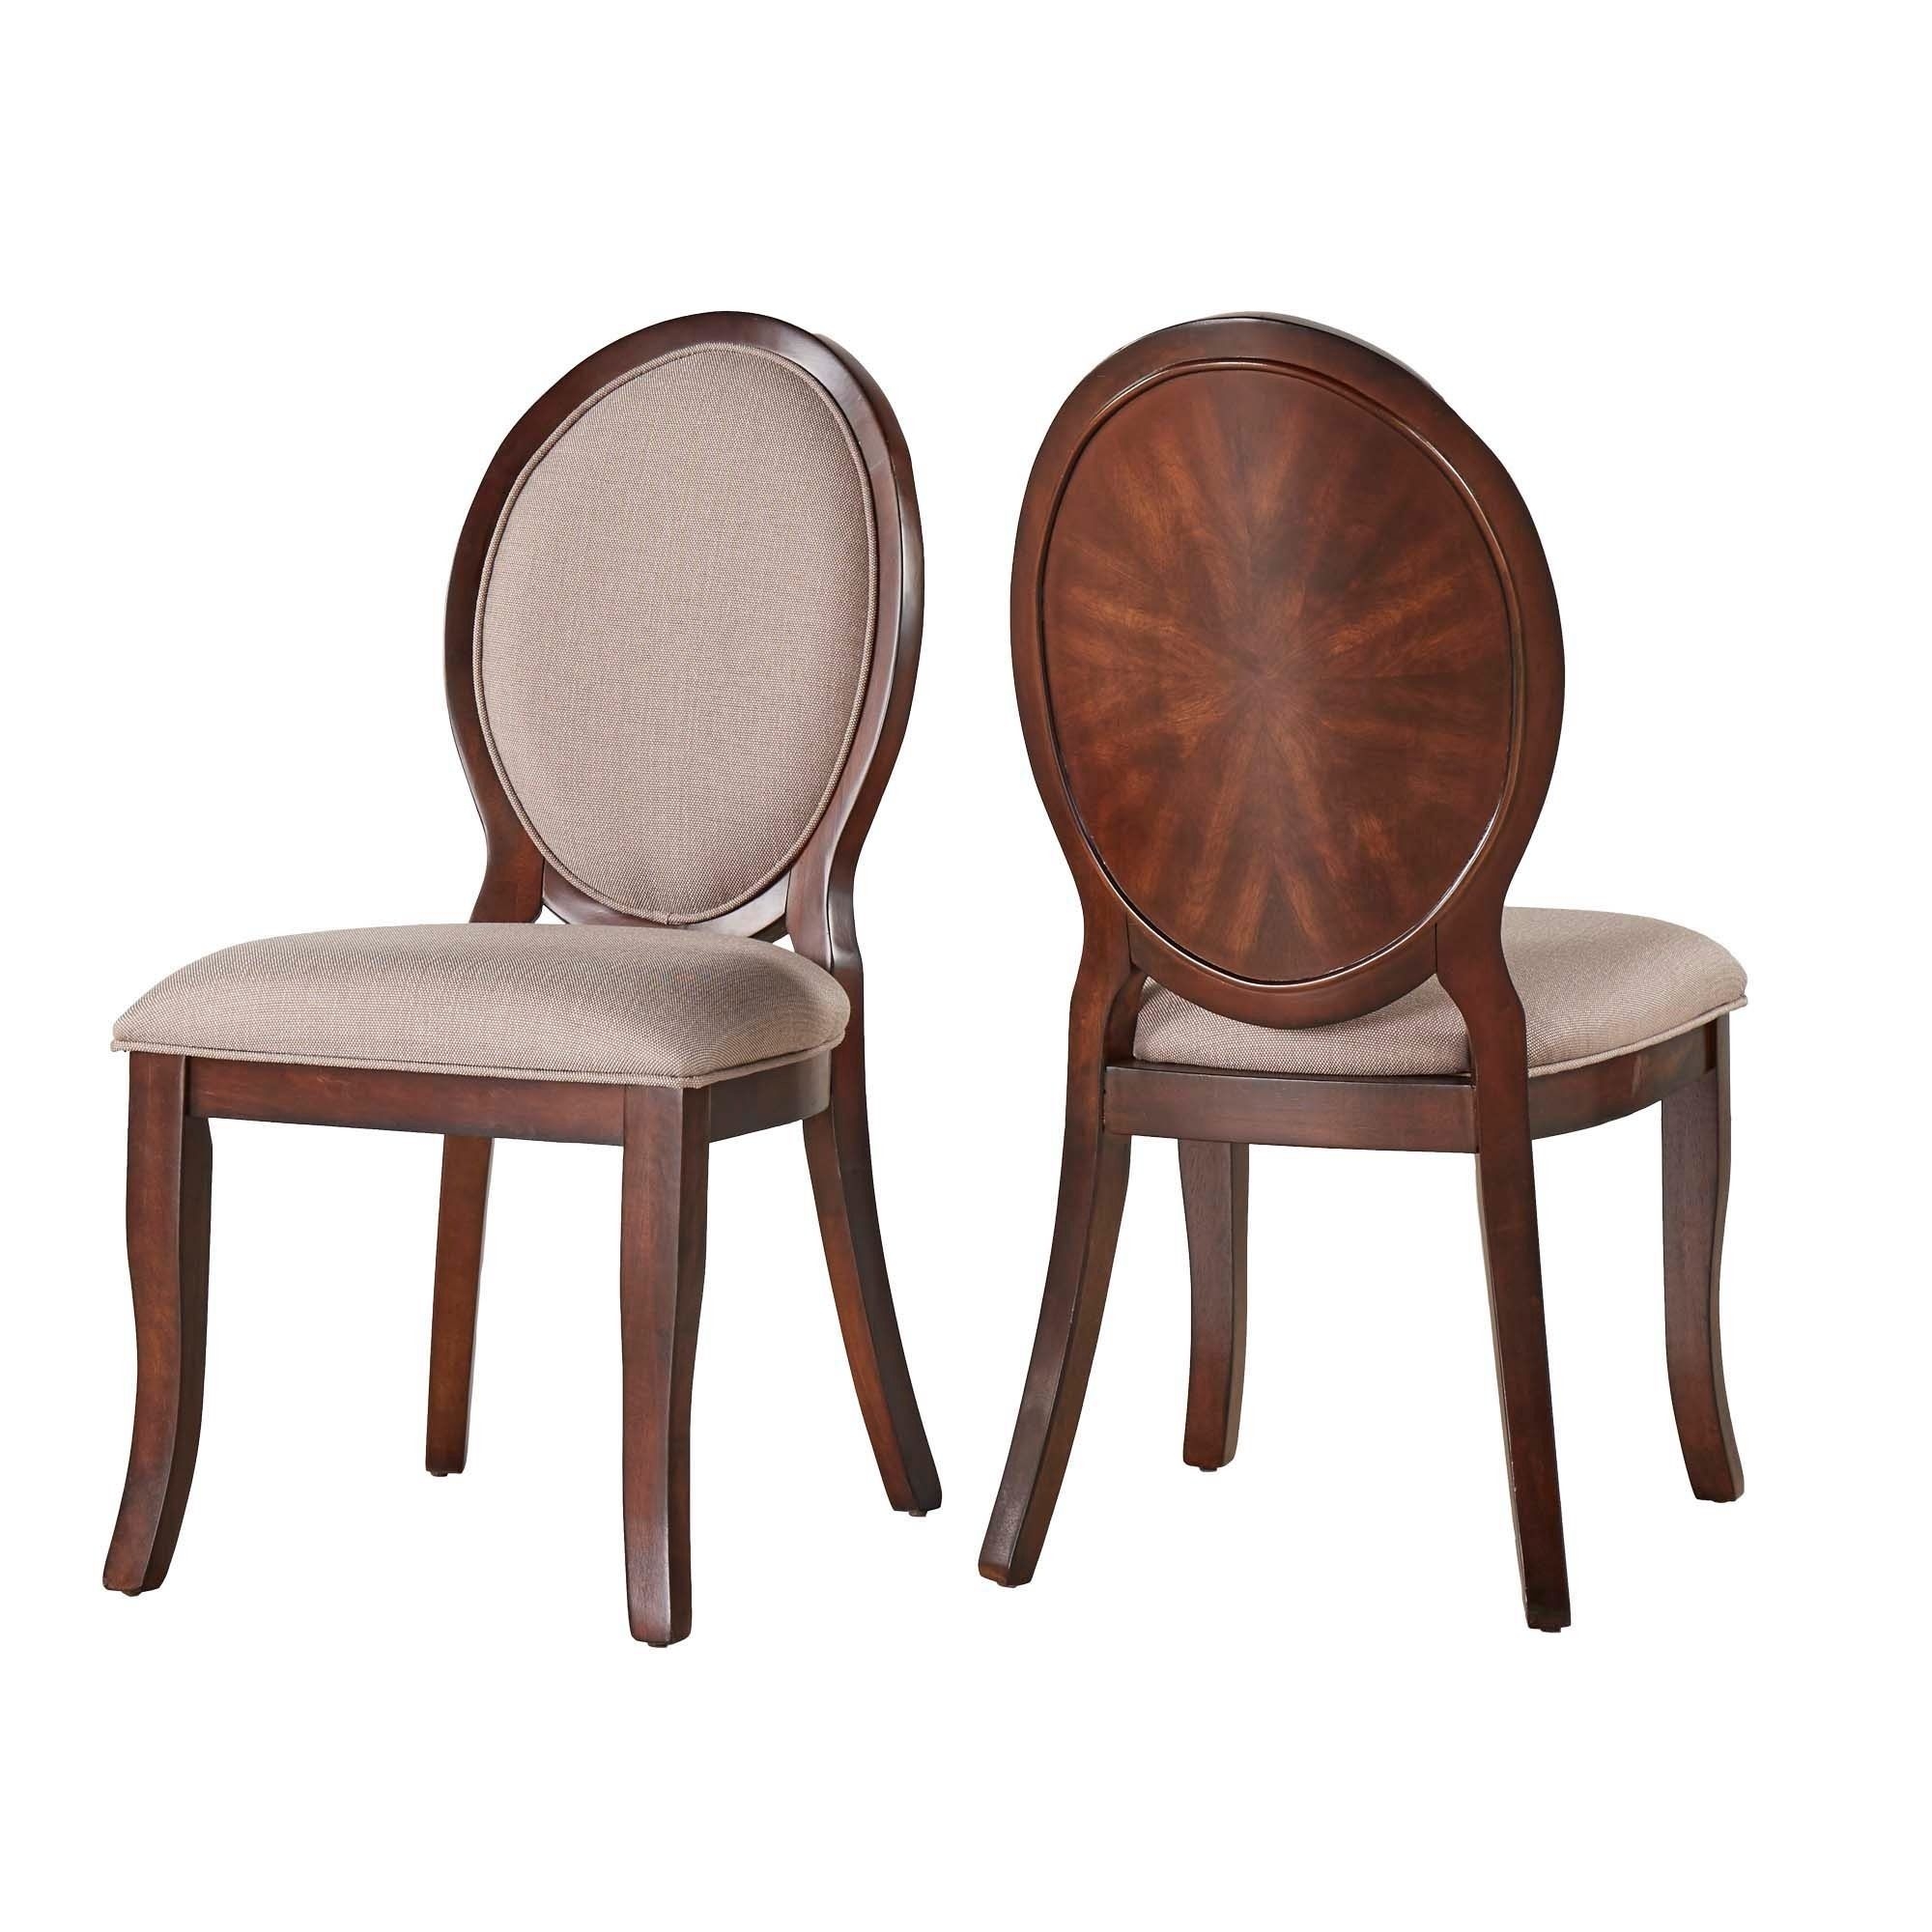 Round Back Dining Chairs Visualhunt, Round Back Dining Chairs Upholstered